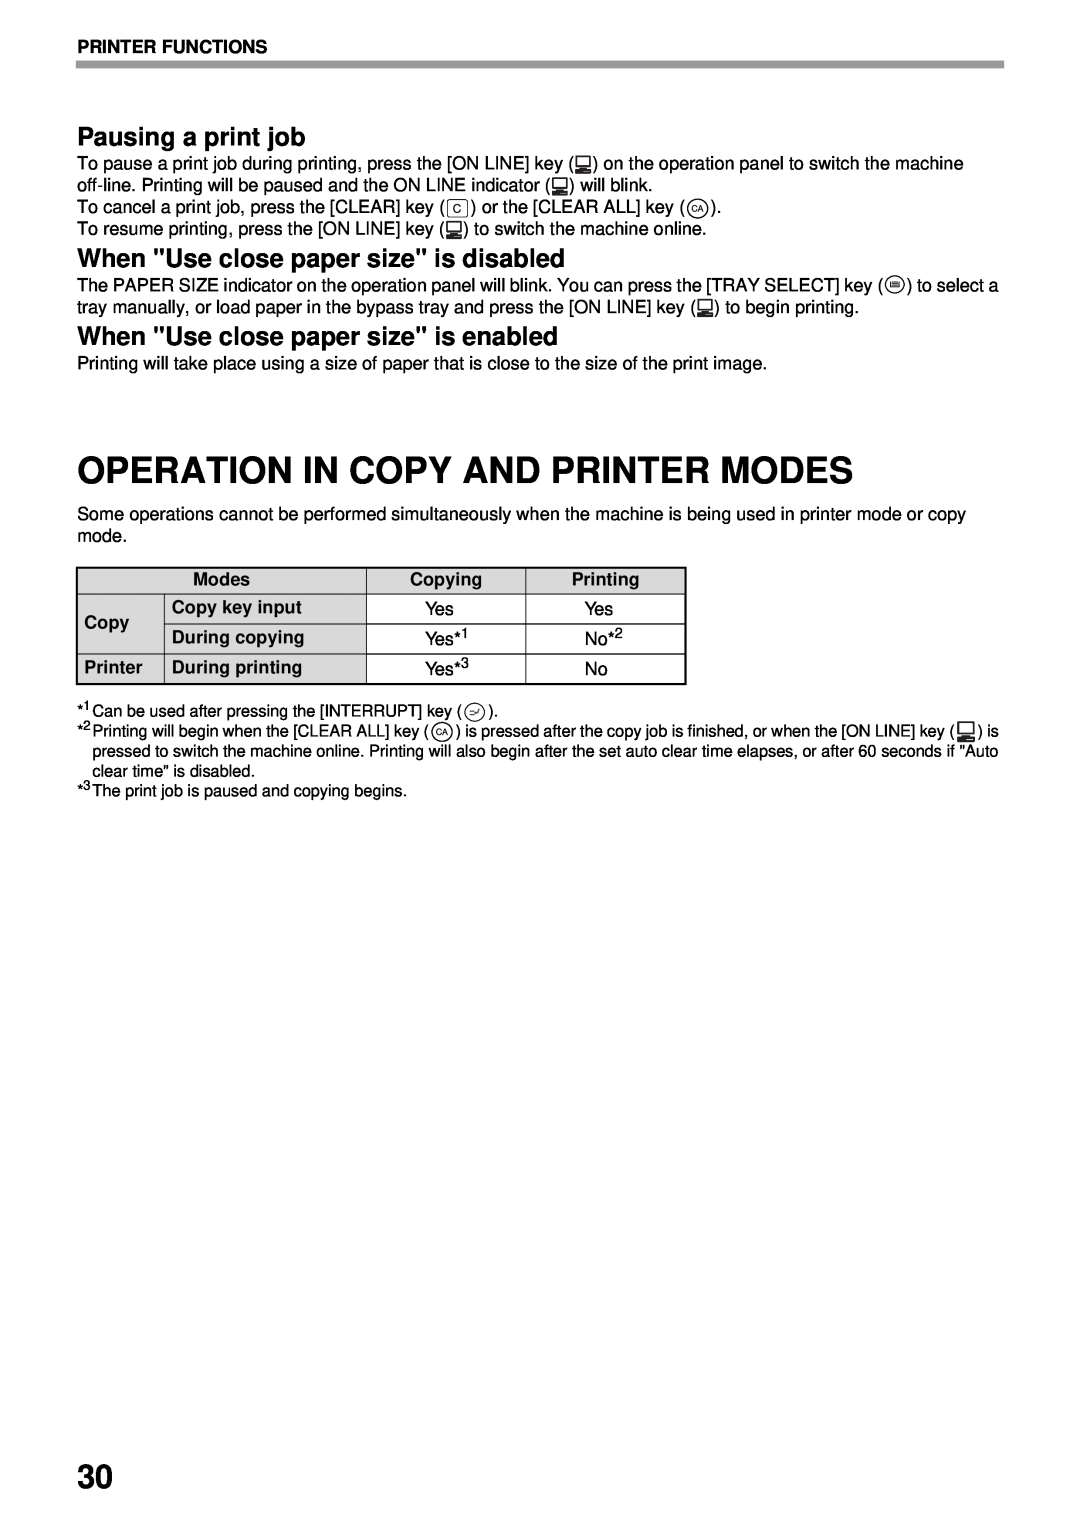 Olivetti 16W, 20W Operation In Copy And Printer Modes, Pausing a print job, When Use close paper size is disabled 